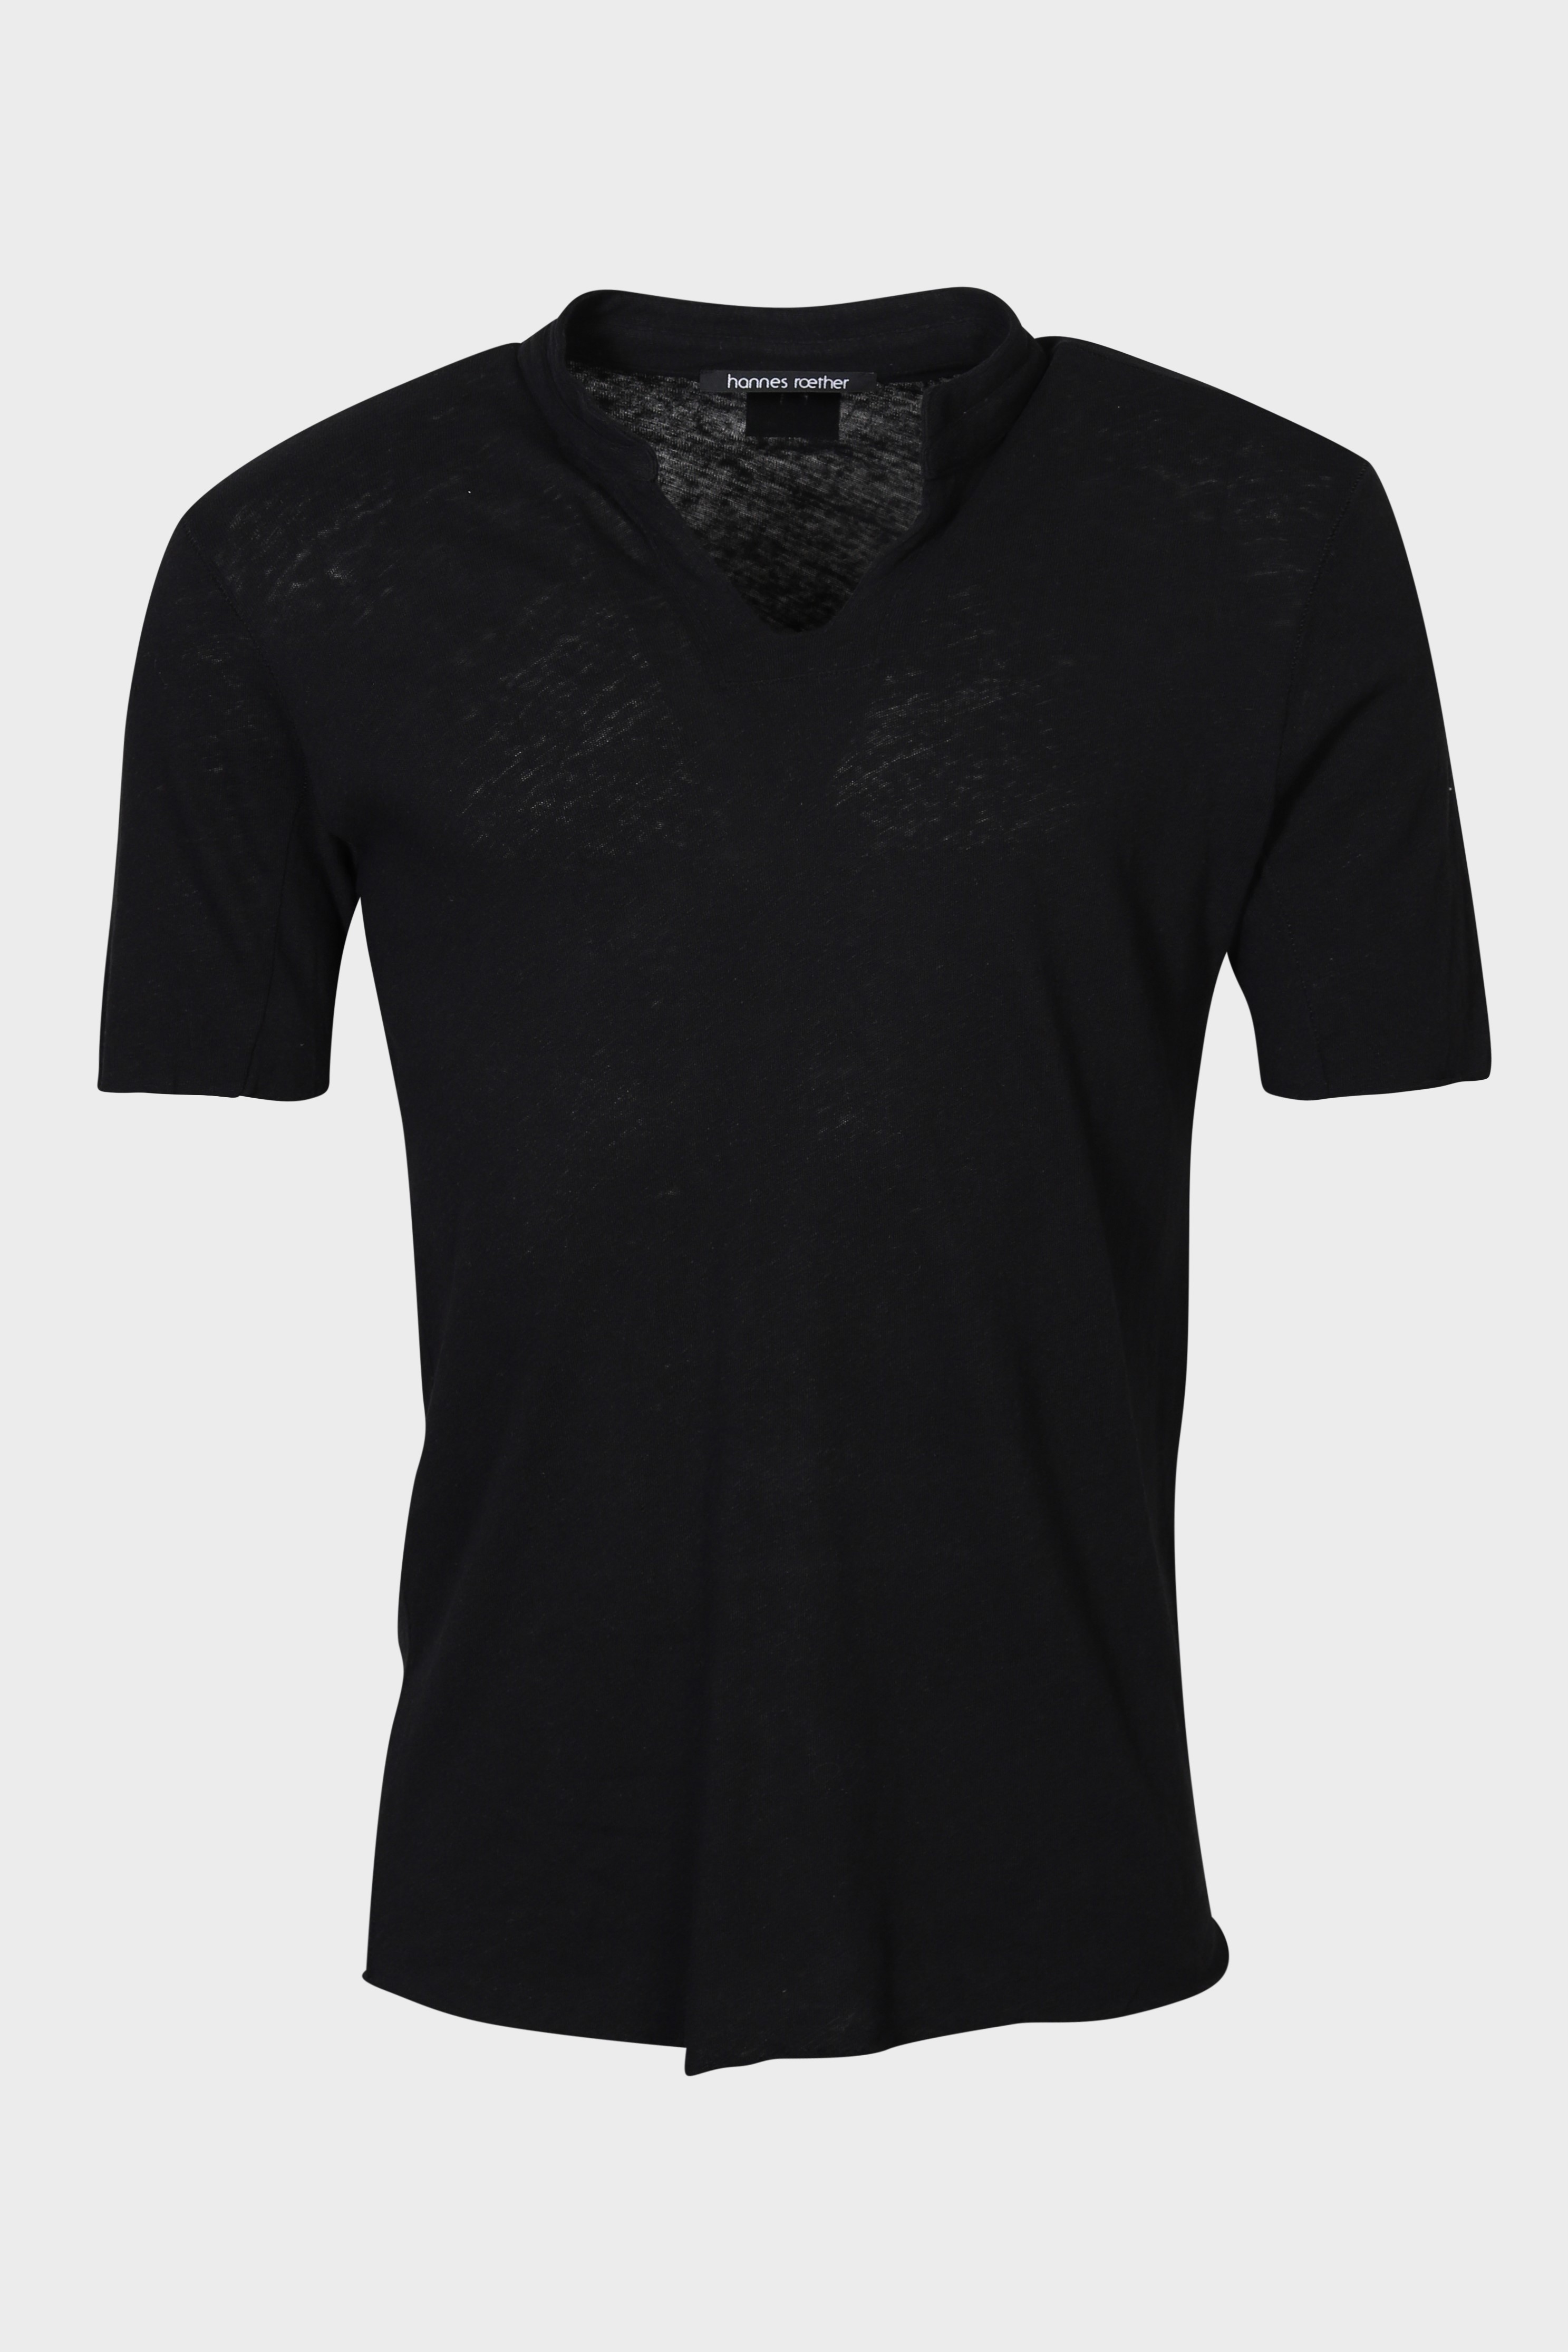 HANNES ROETHER Cotton Linen T-Shirt in Black L